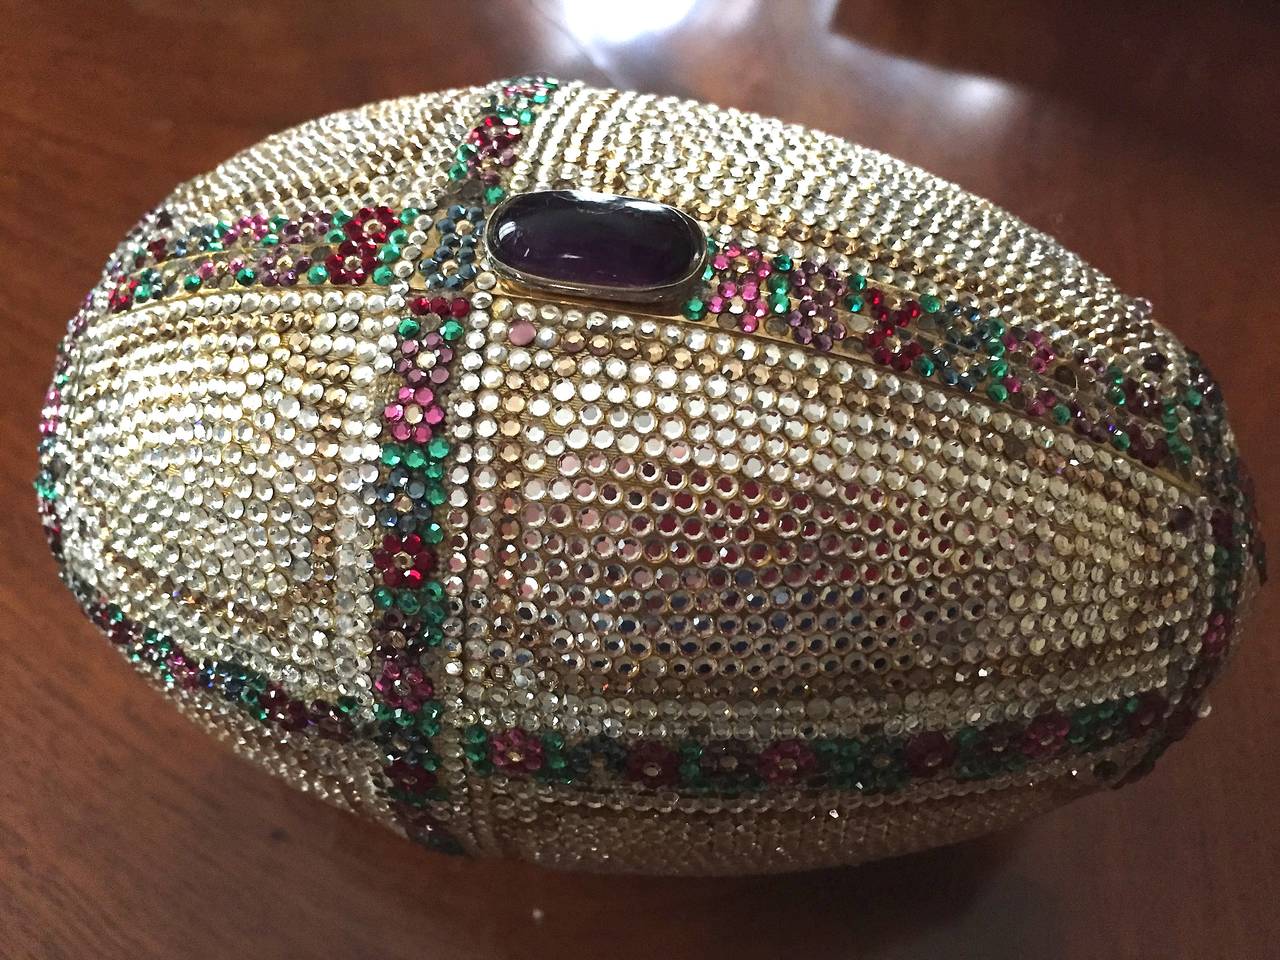 Delightful Judith Leiber Faberge Style Egg Minaudiere

Designed as an egg with a trellis of tiny flowers in amethyst , emerald and ruby.
Between the trellis is clear crystal with a topaz cartouche inside.
The missing crystals are mostly the